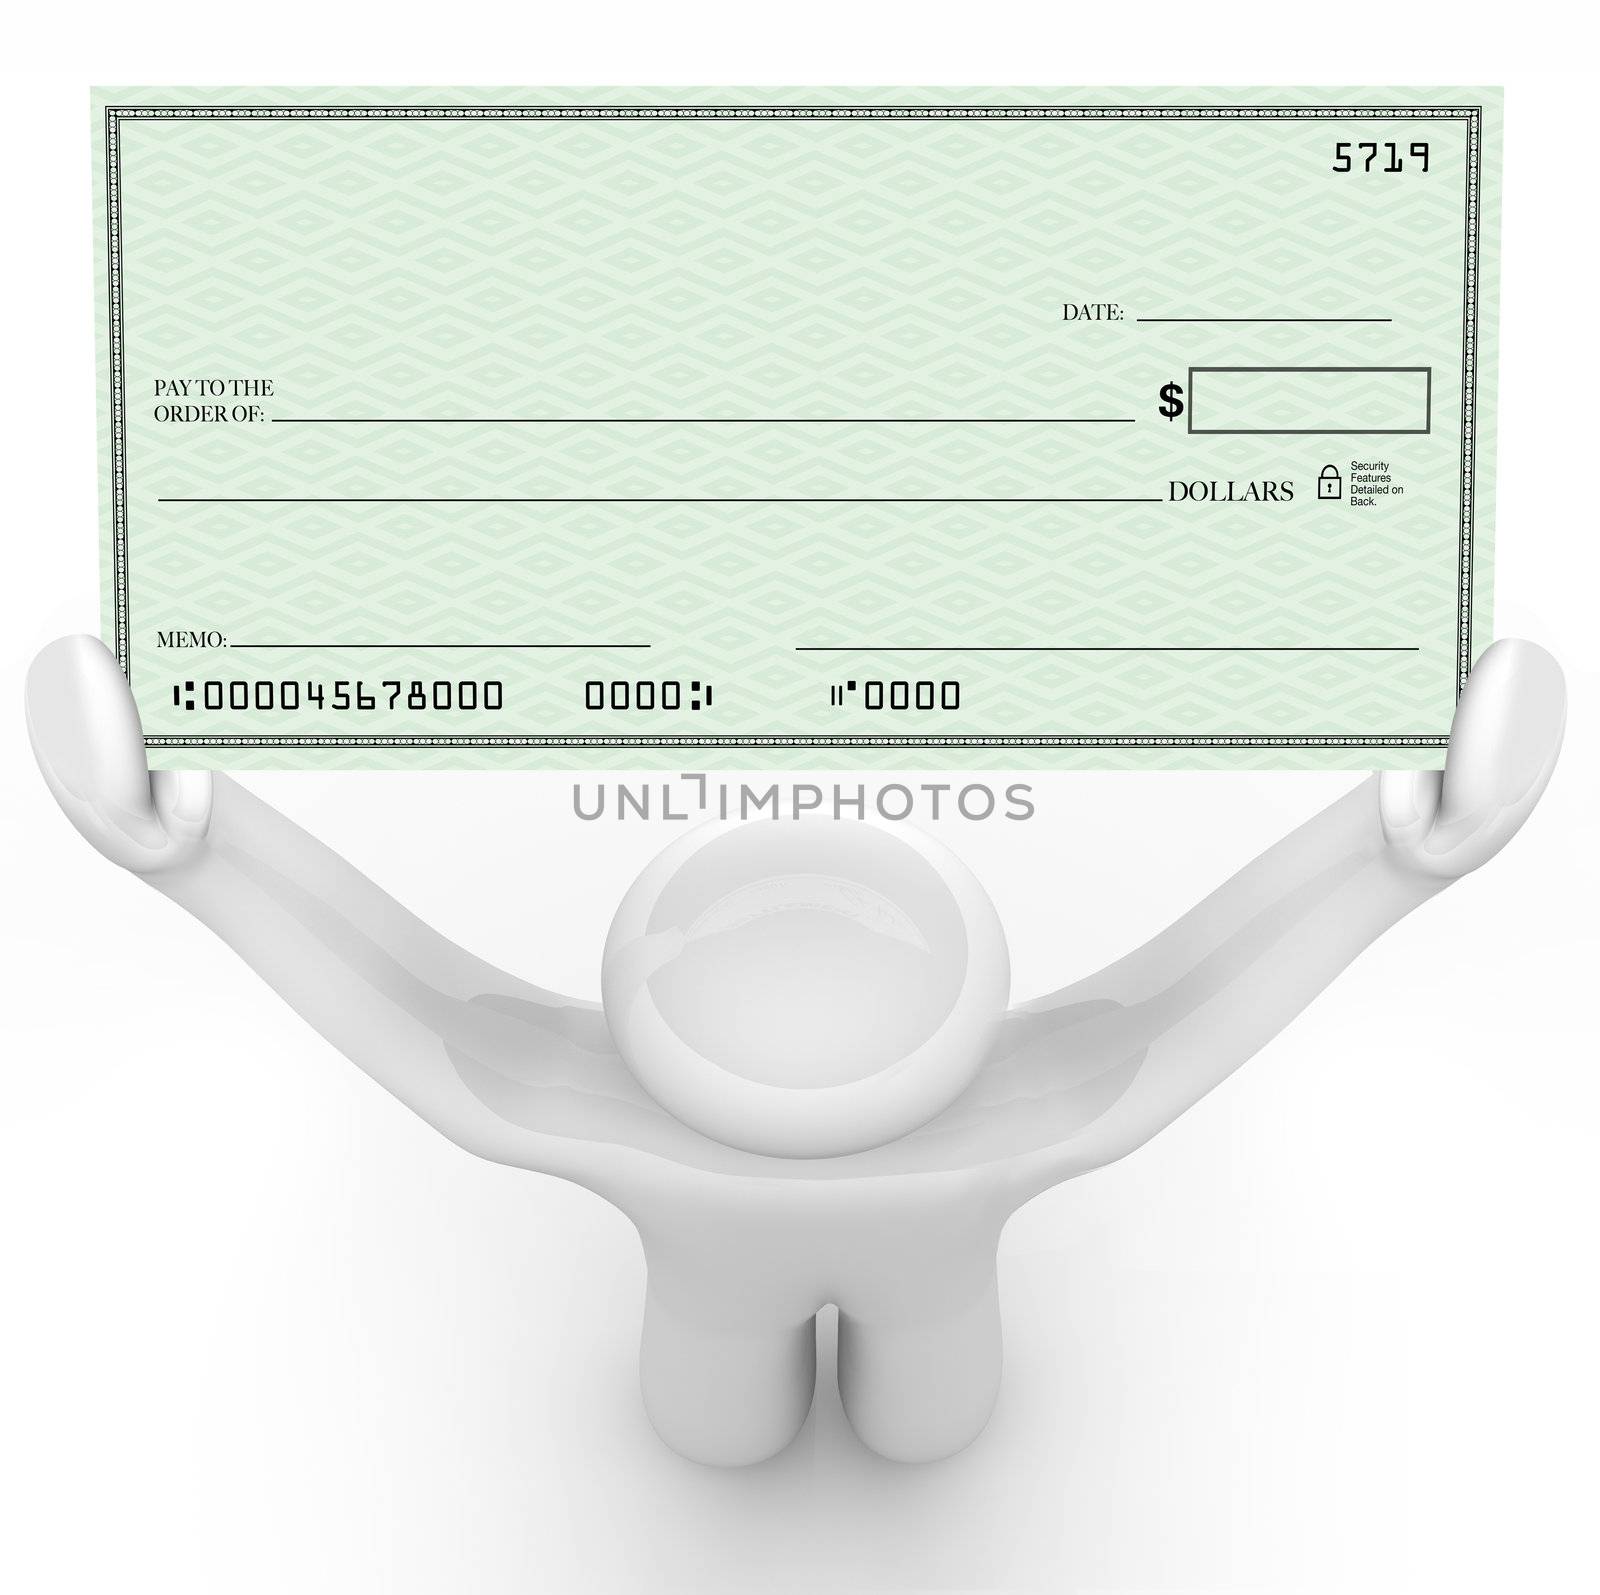 A man holds a large paper check that is blank and has space for you to include your own text